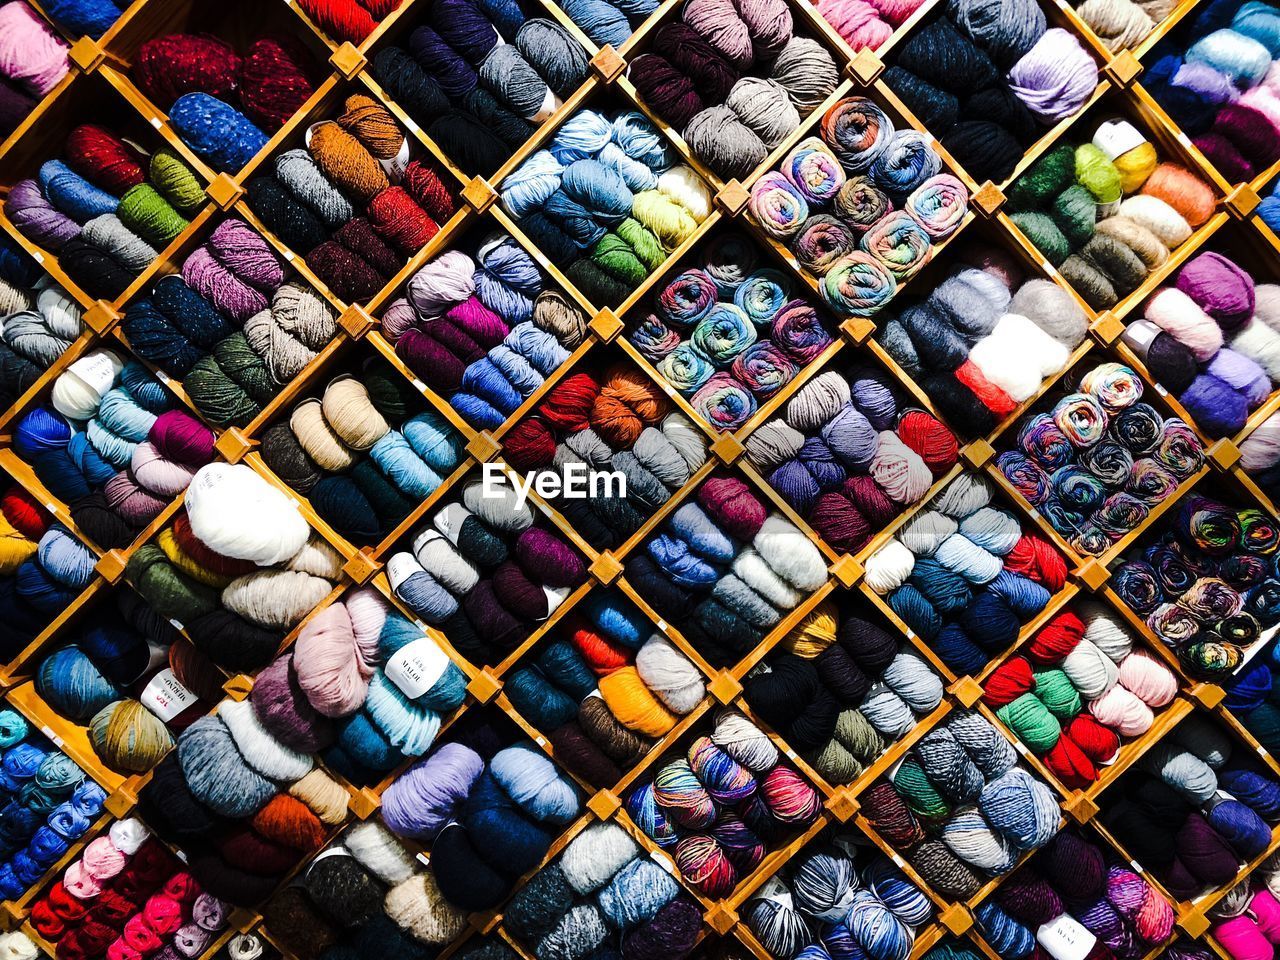 Full frame shot of multi colored wools and threads for sale